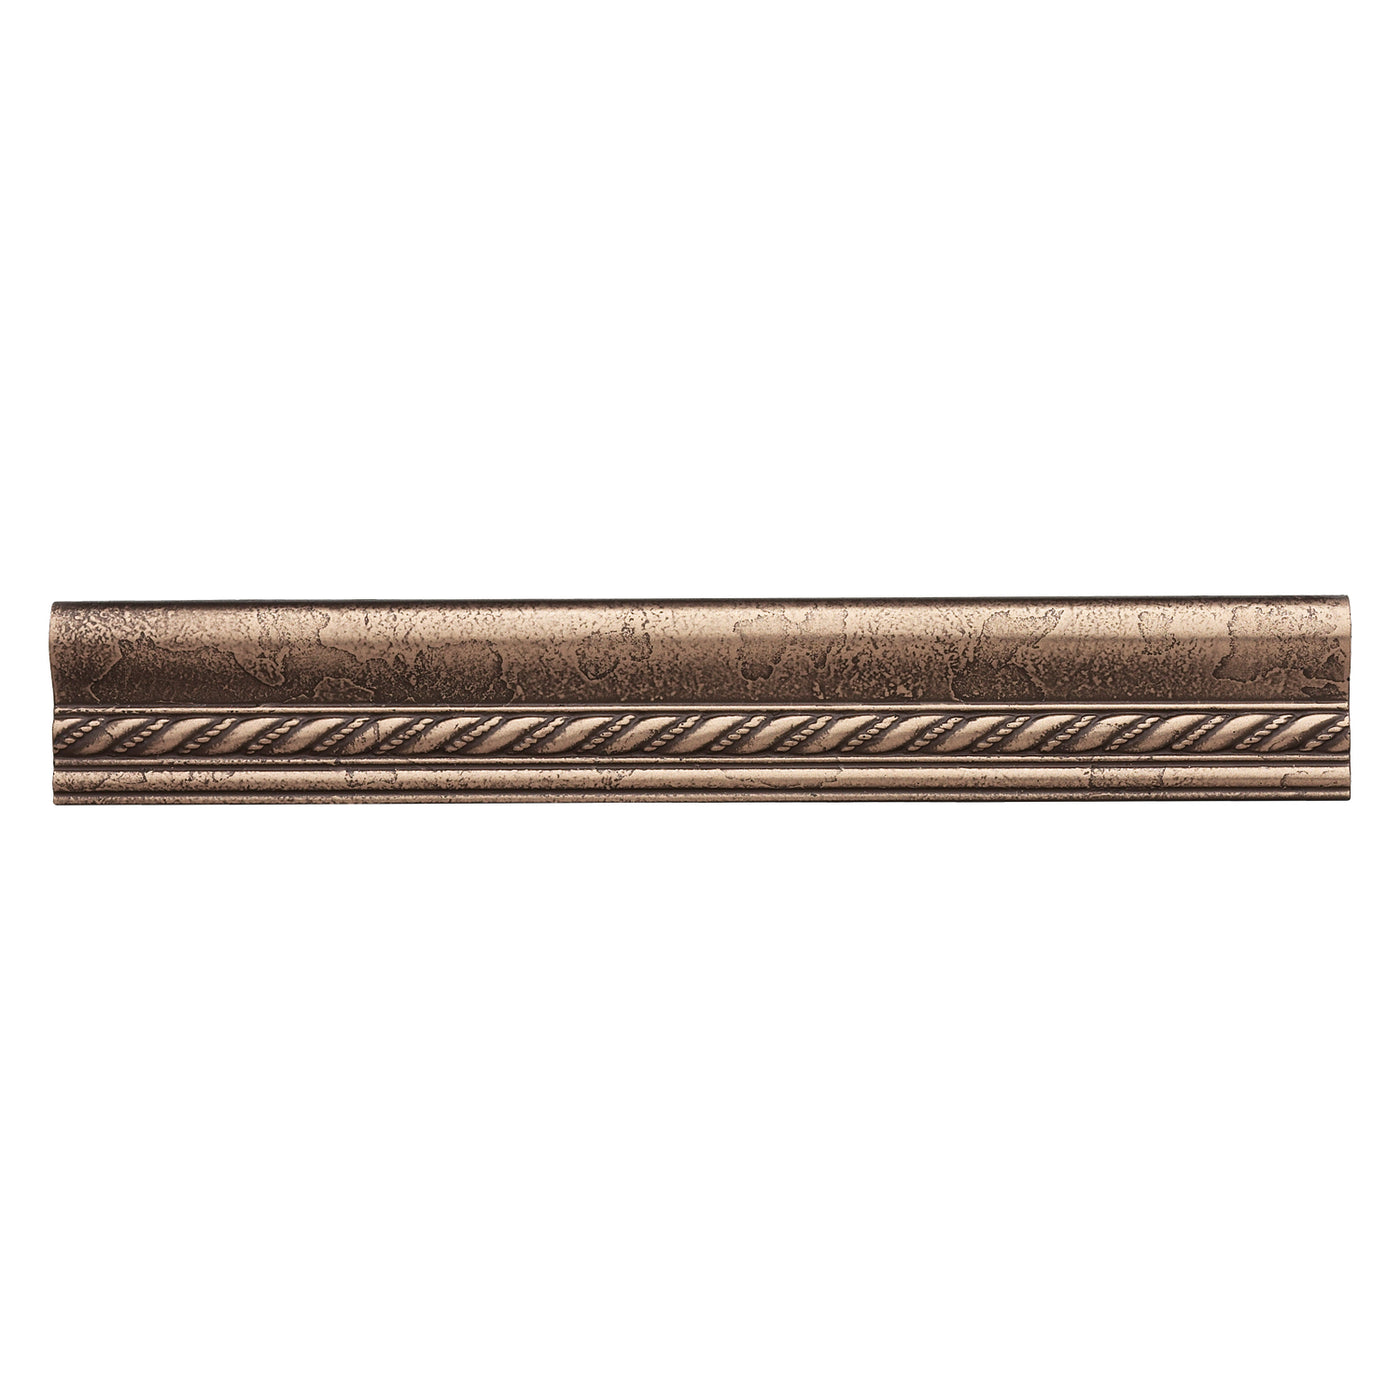 Questech Braided 2" x 12" Metal Rope Ogee